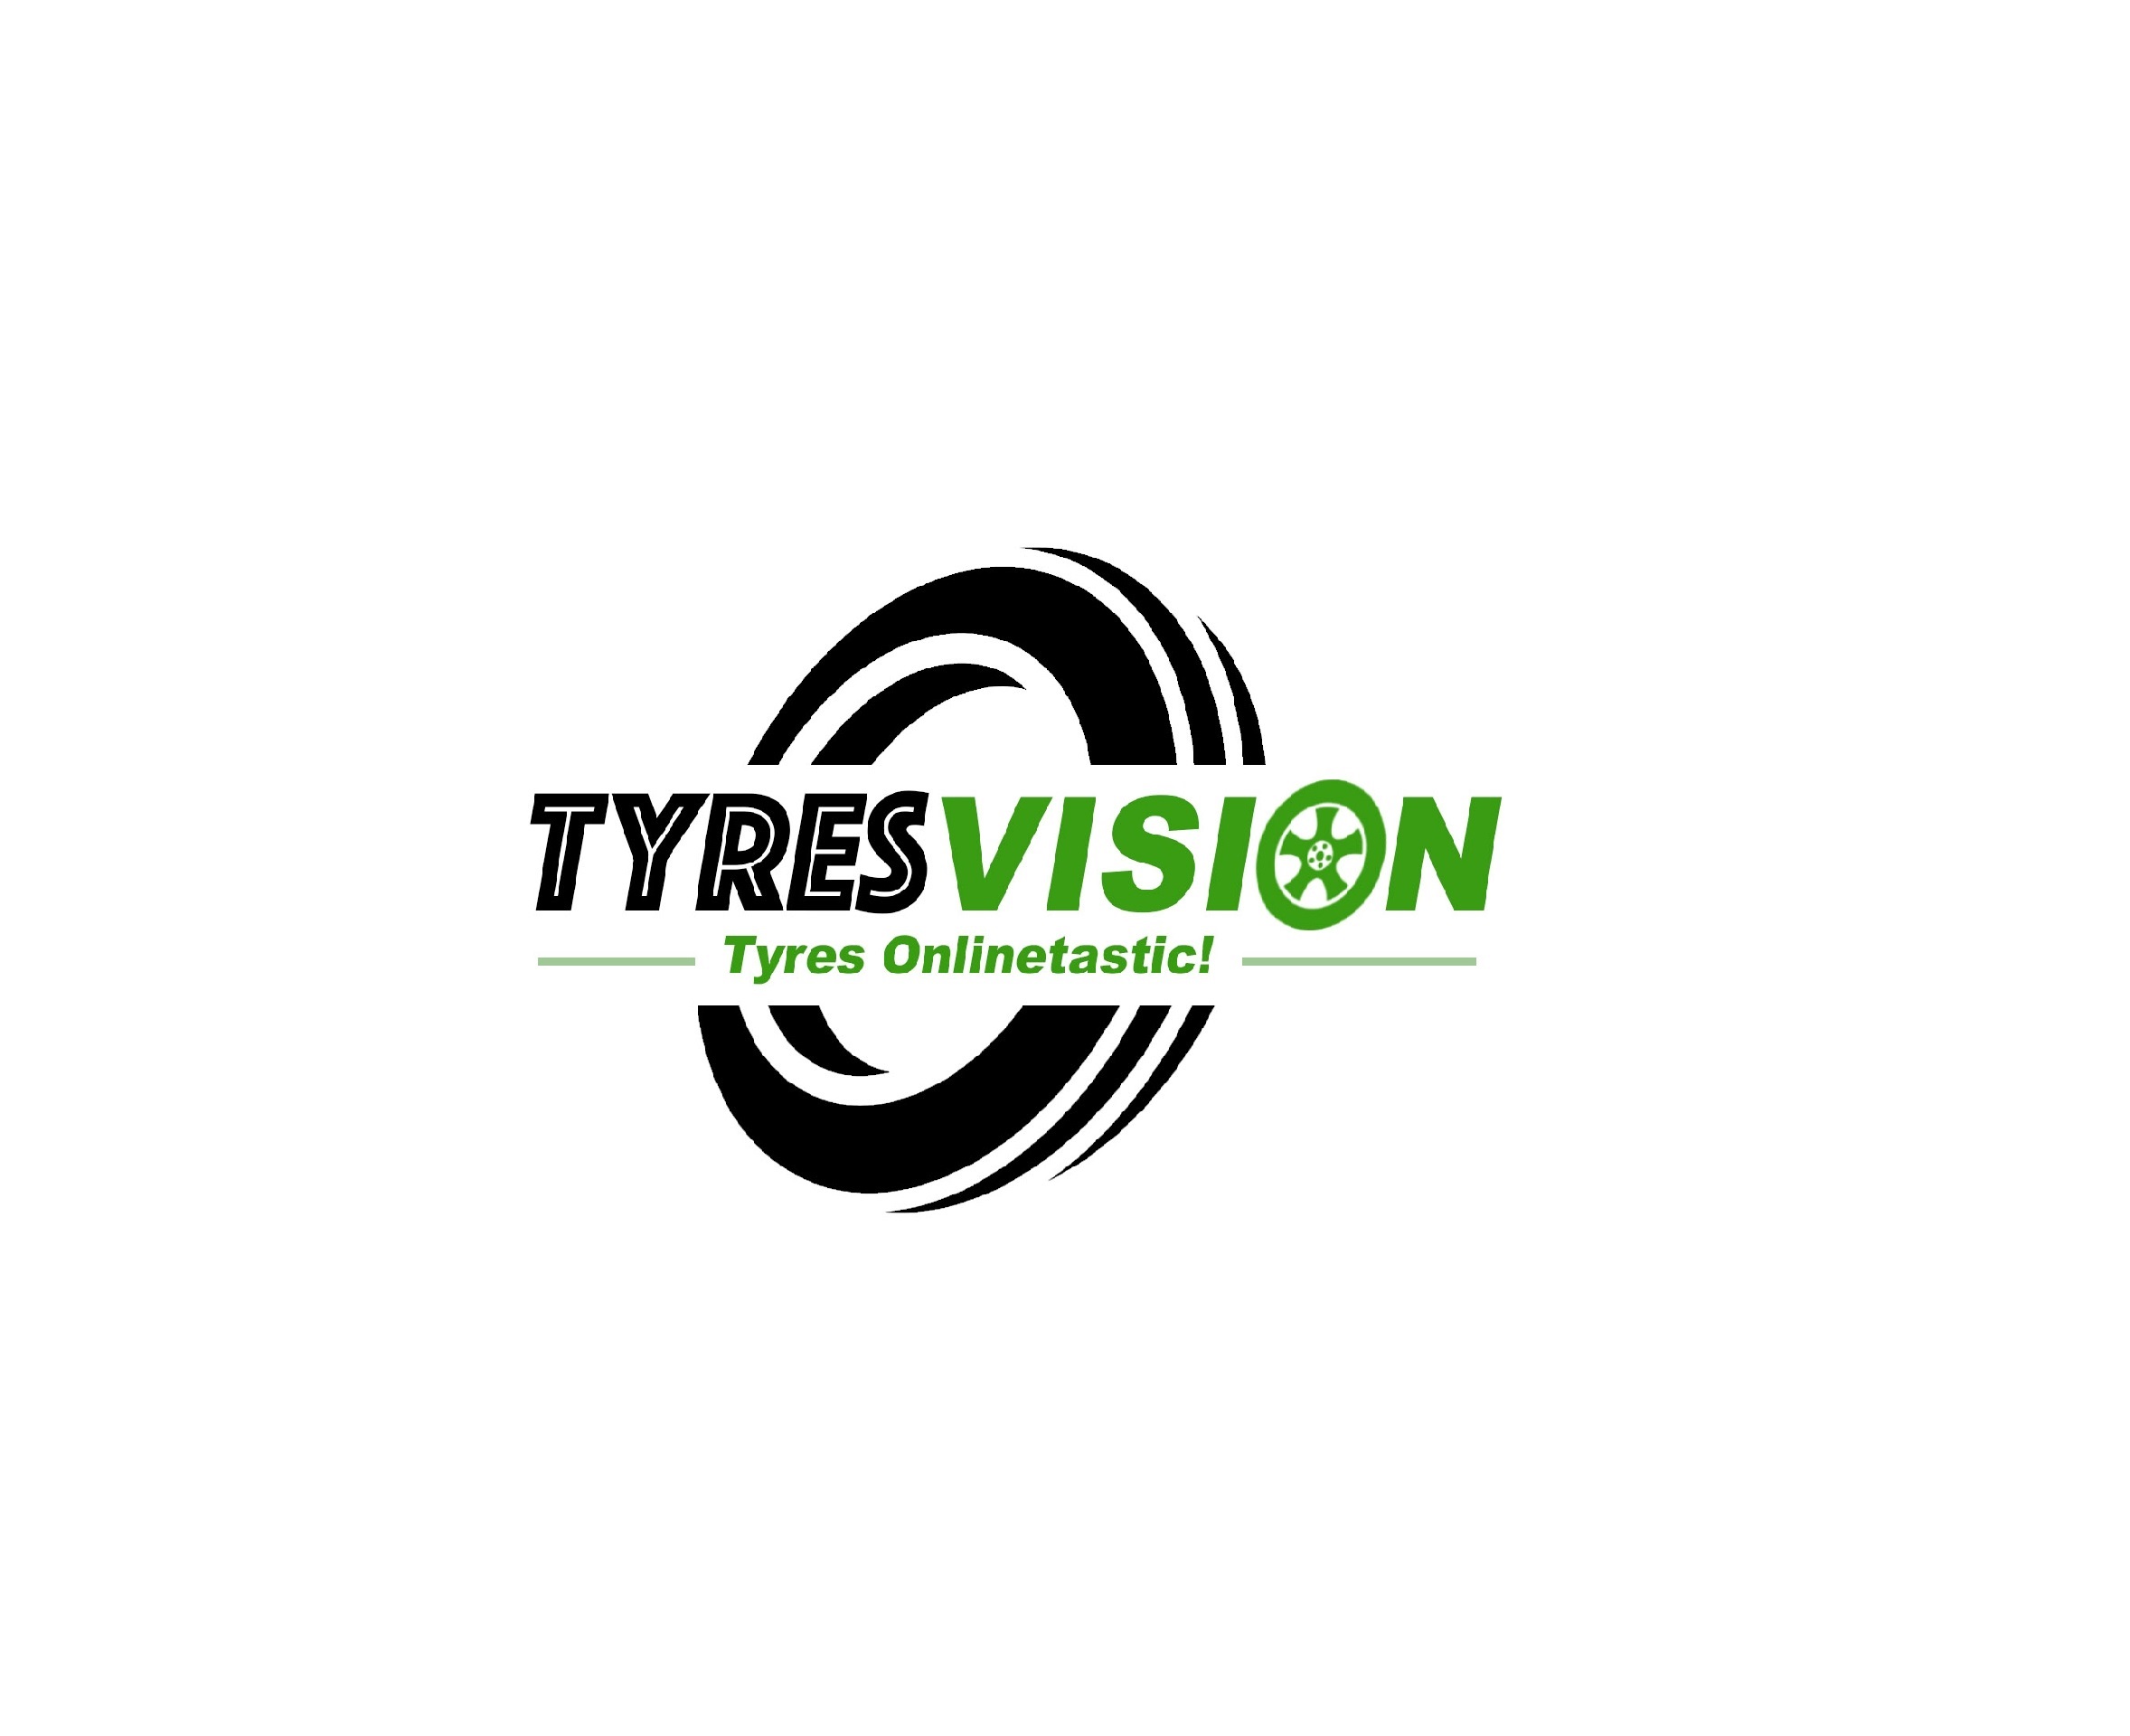 Tyres vision